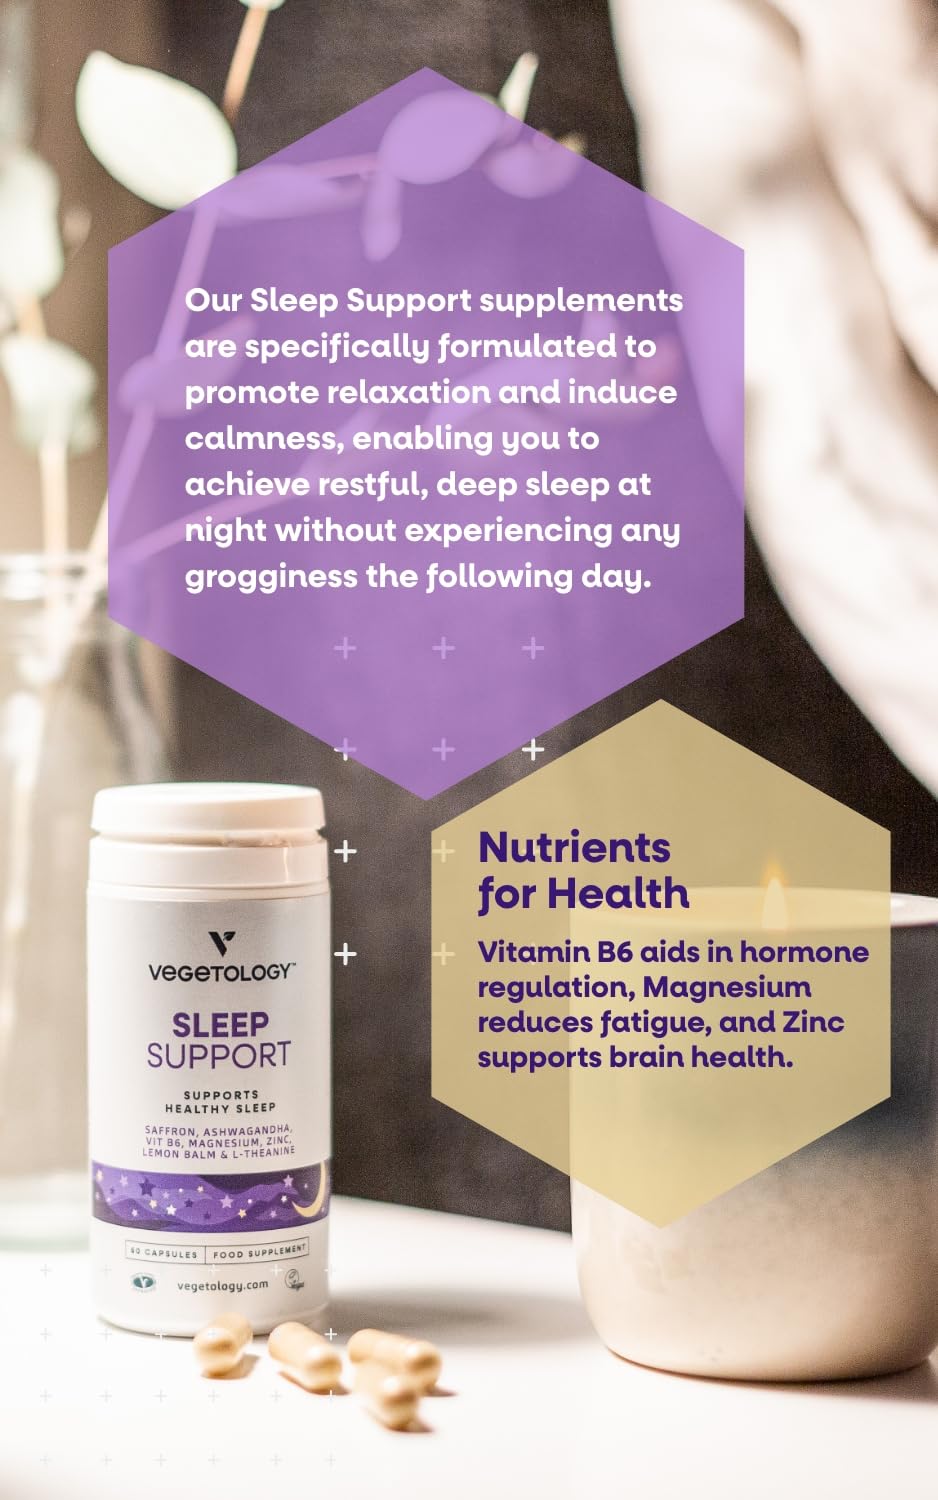 Vegetology Sleep Support | Natural Sleep Aid with Saffron, Ashwagandha & Lemon Balm | Scientifically Formulated for Deep Rest | 100% Vegan & Made in UK | Ethical & Sustainably Sourced